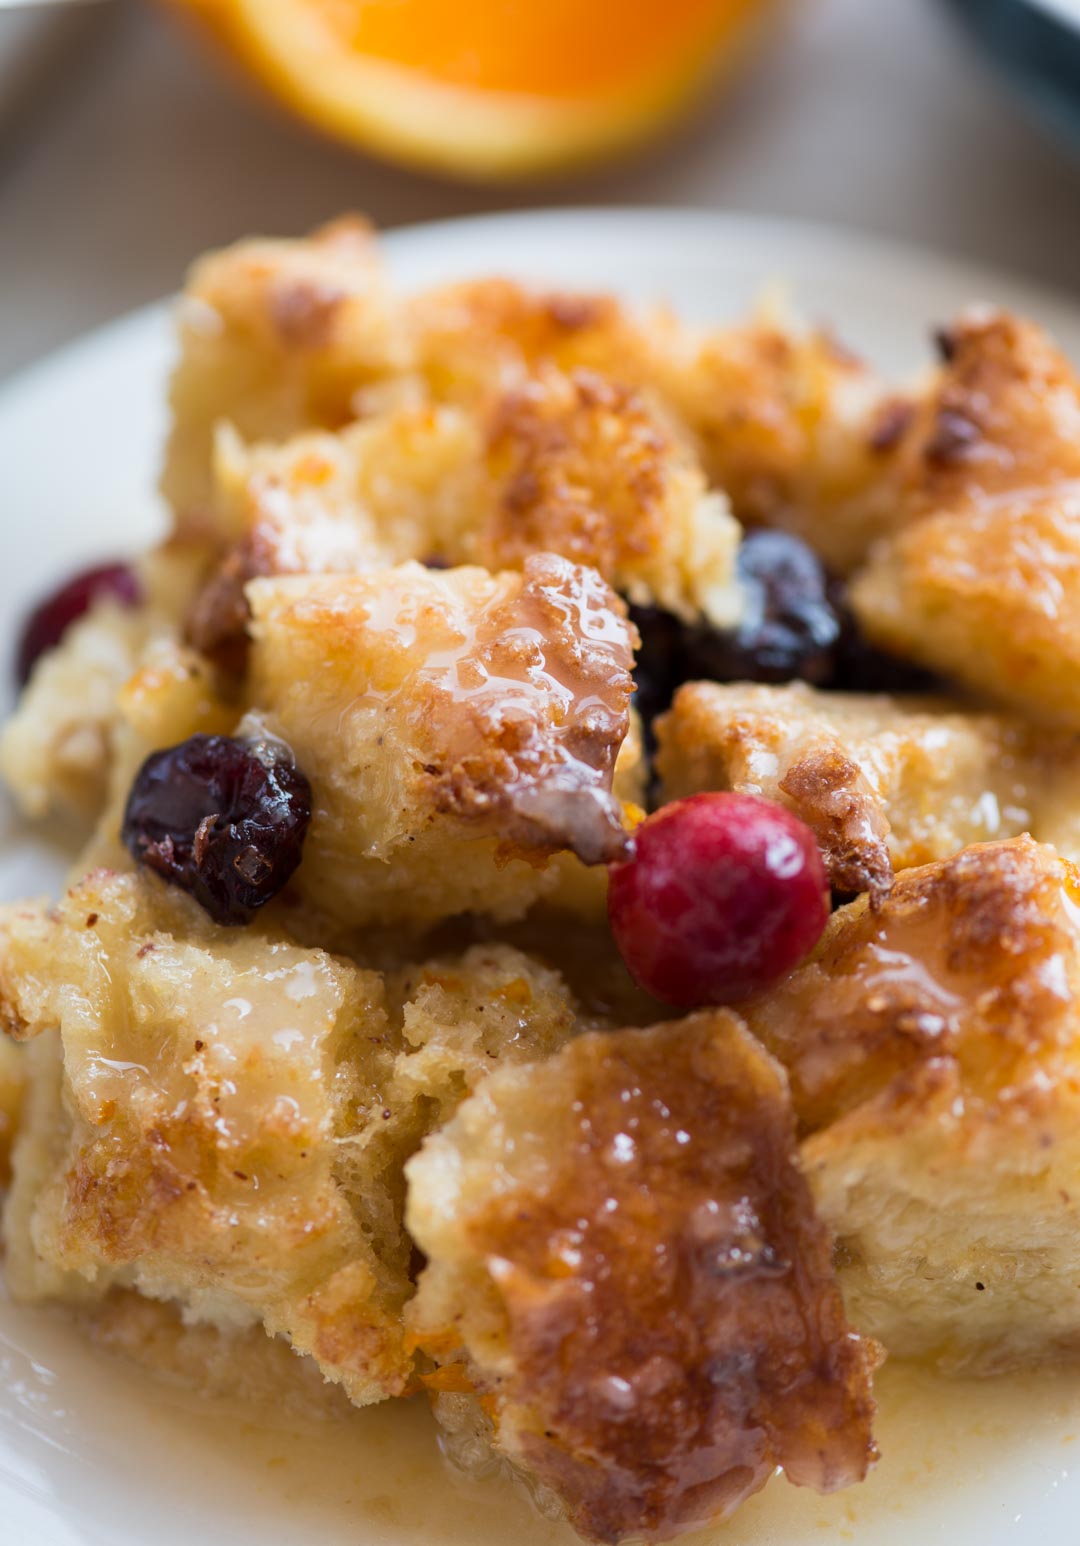 Warm Orange Cranberry Bread Pudding with a gooey custard-like centre and crispy top is a delicious dessert everyone would love. Top it with orange glaze while serving.